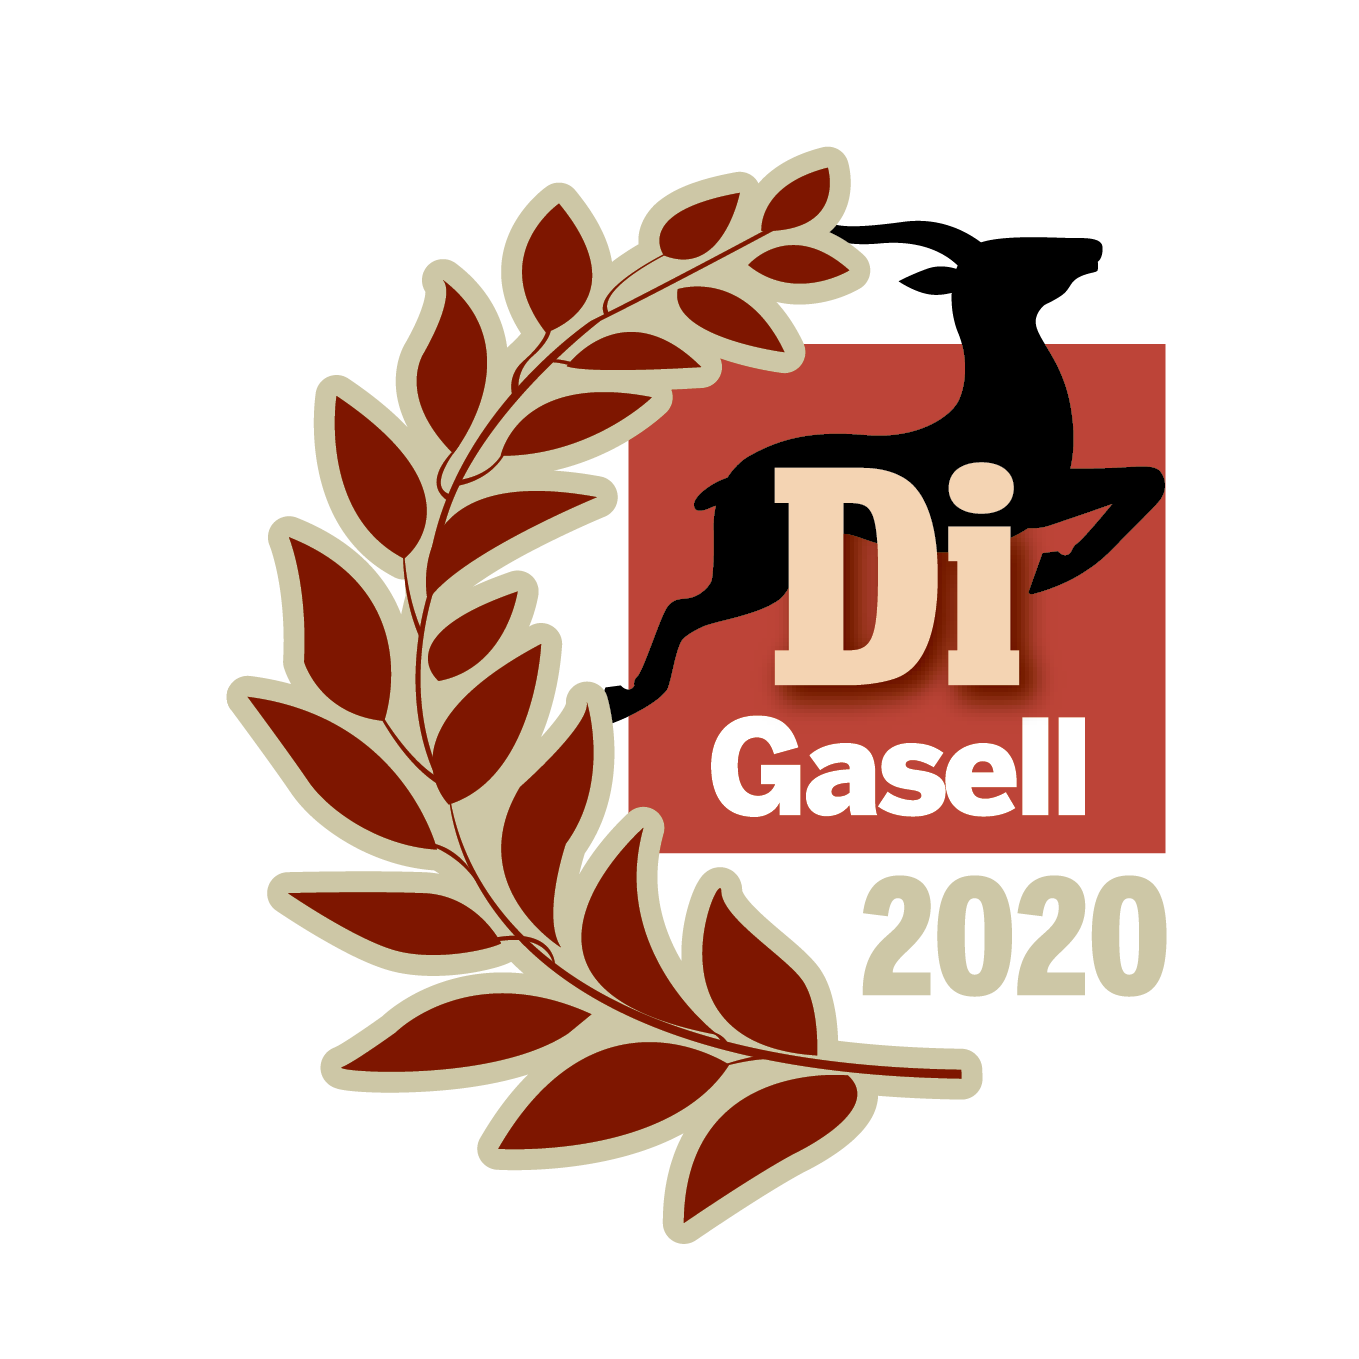 We are proud to announce that we have received the Gasell award!